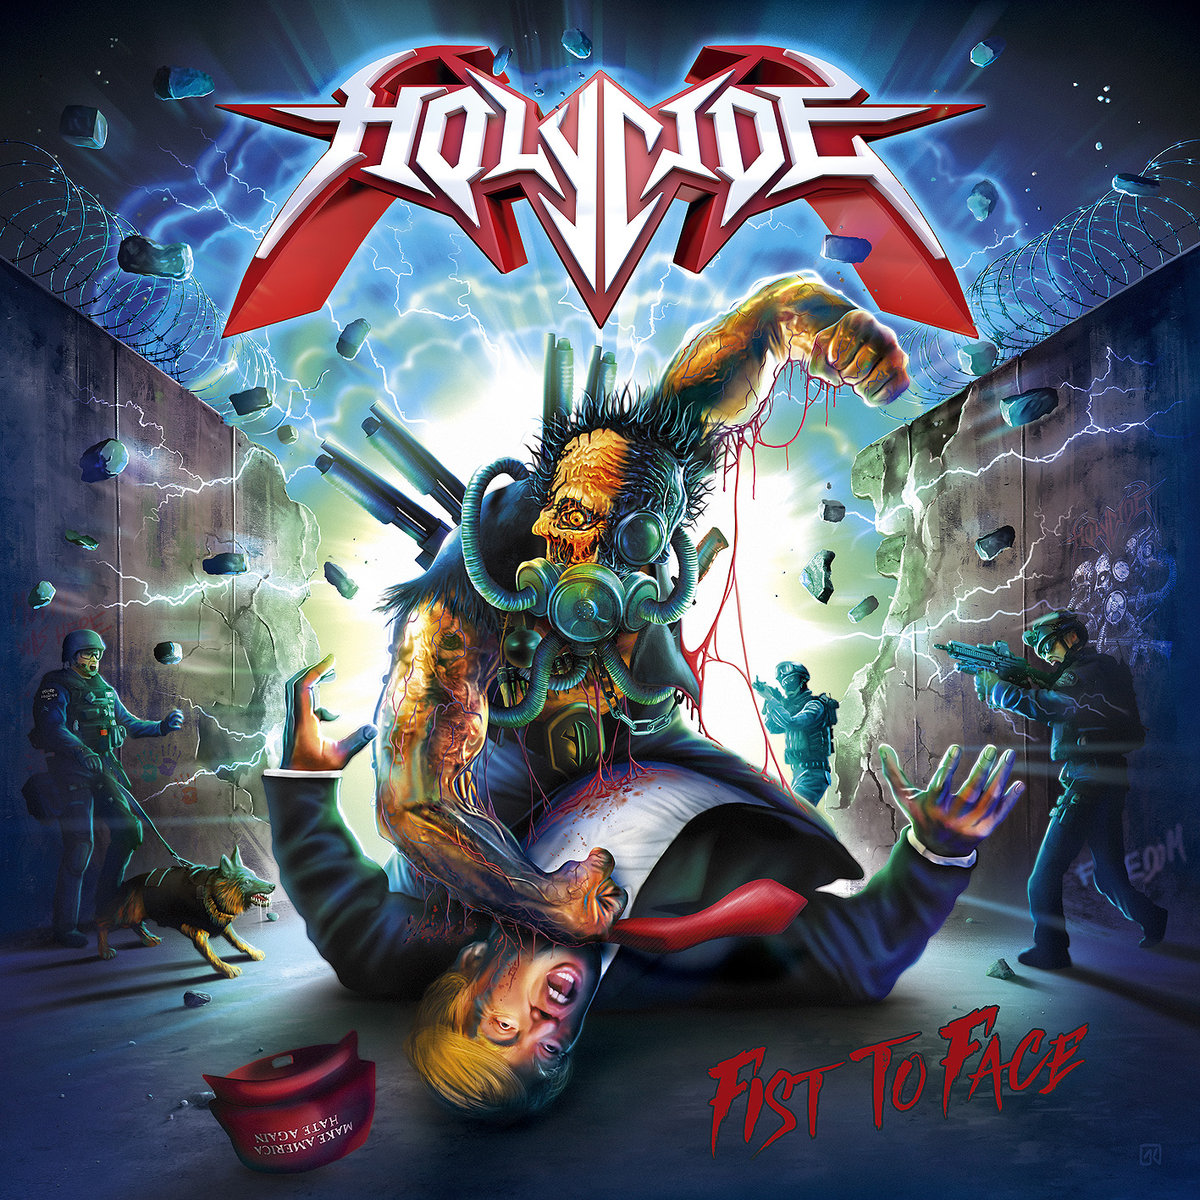 holycide – fist to face